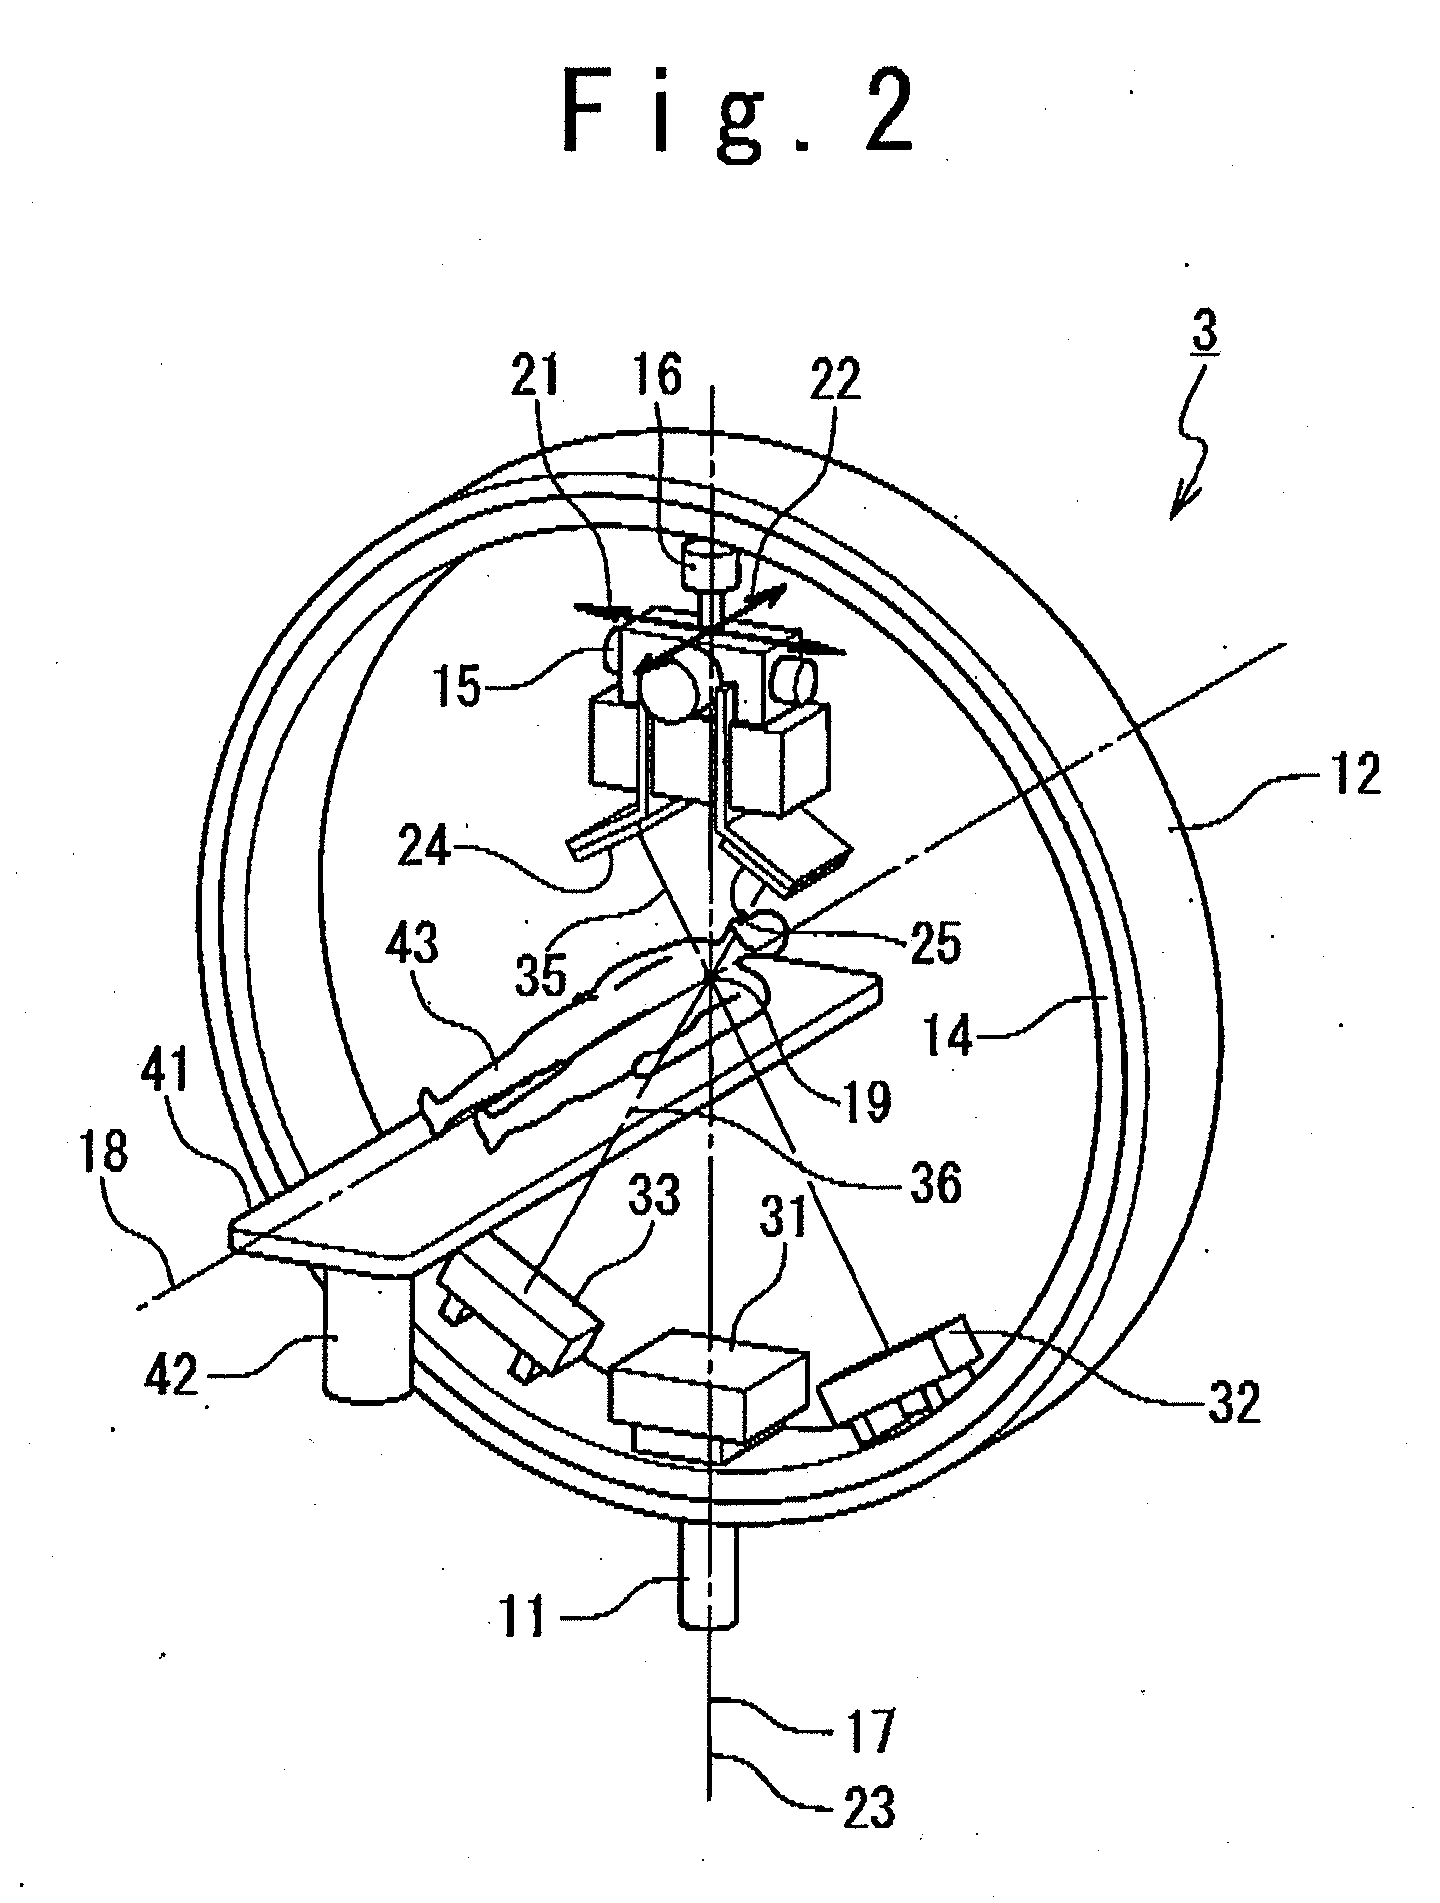 Radiation therapy planning apparatus and radiation therapy planning method